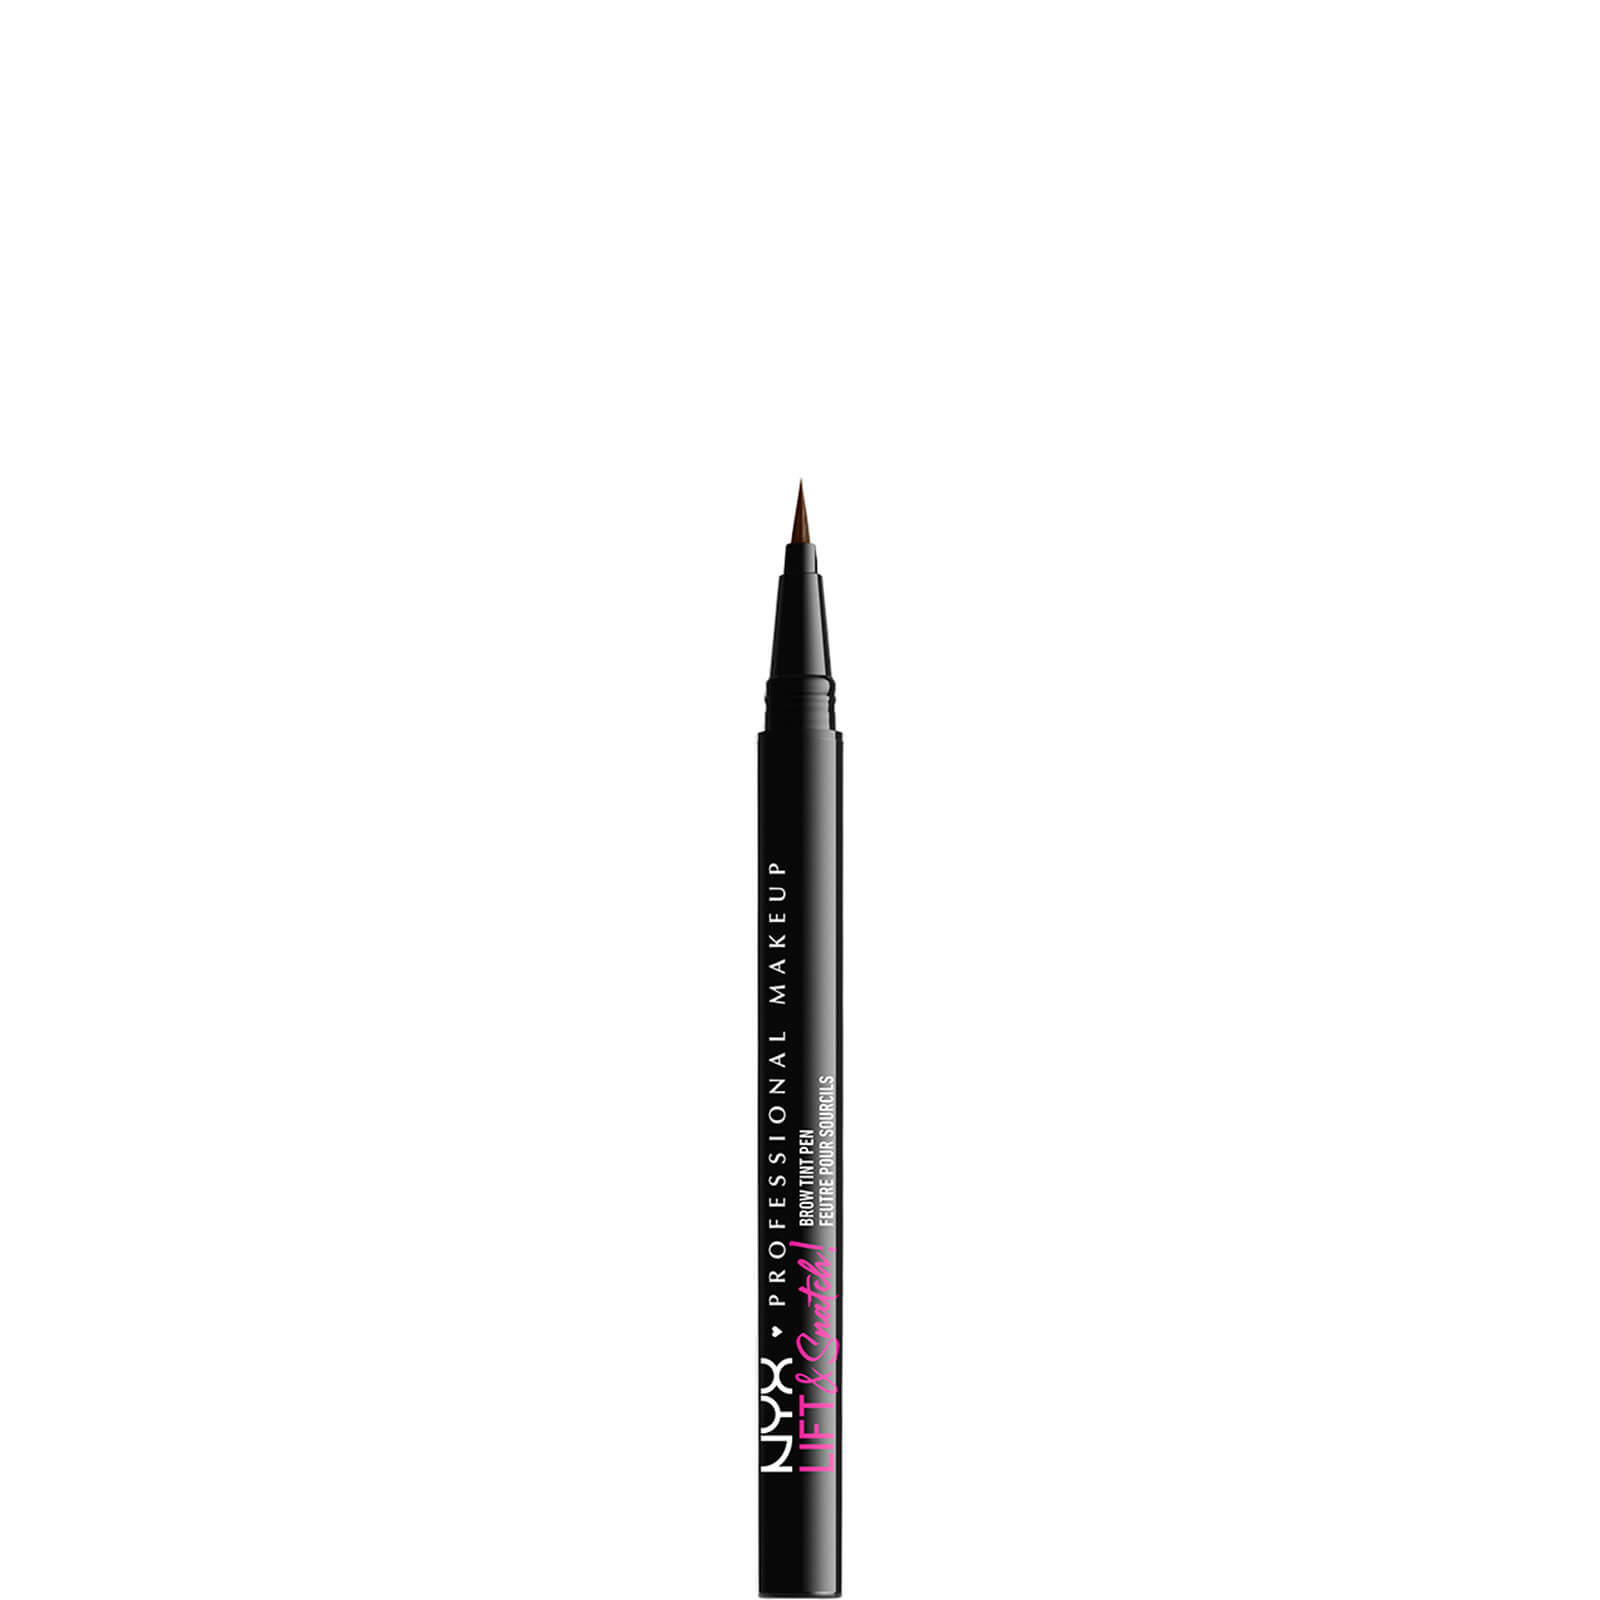 NYX Professional Makeup Lift and Snatch Brow Tint Pen 3g (Various Shades) - Espresso